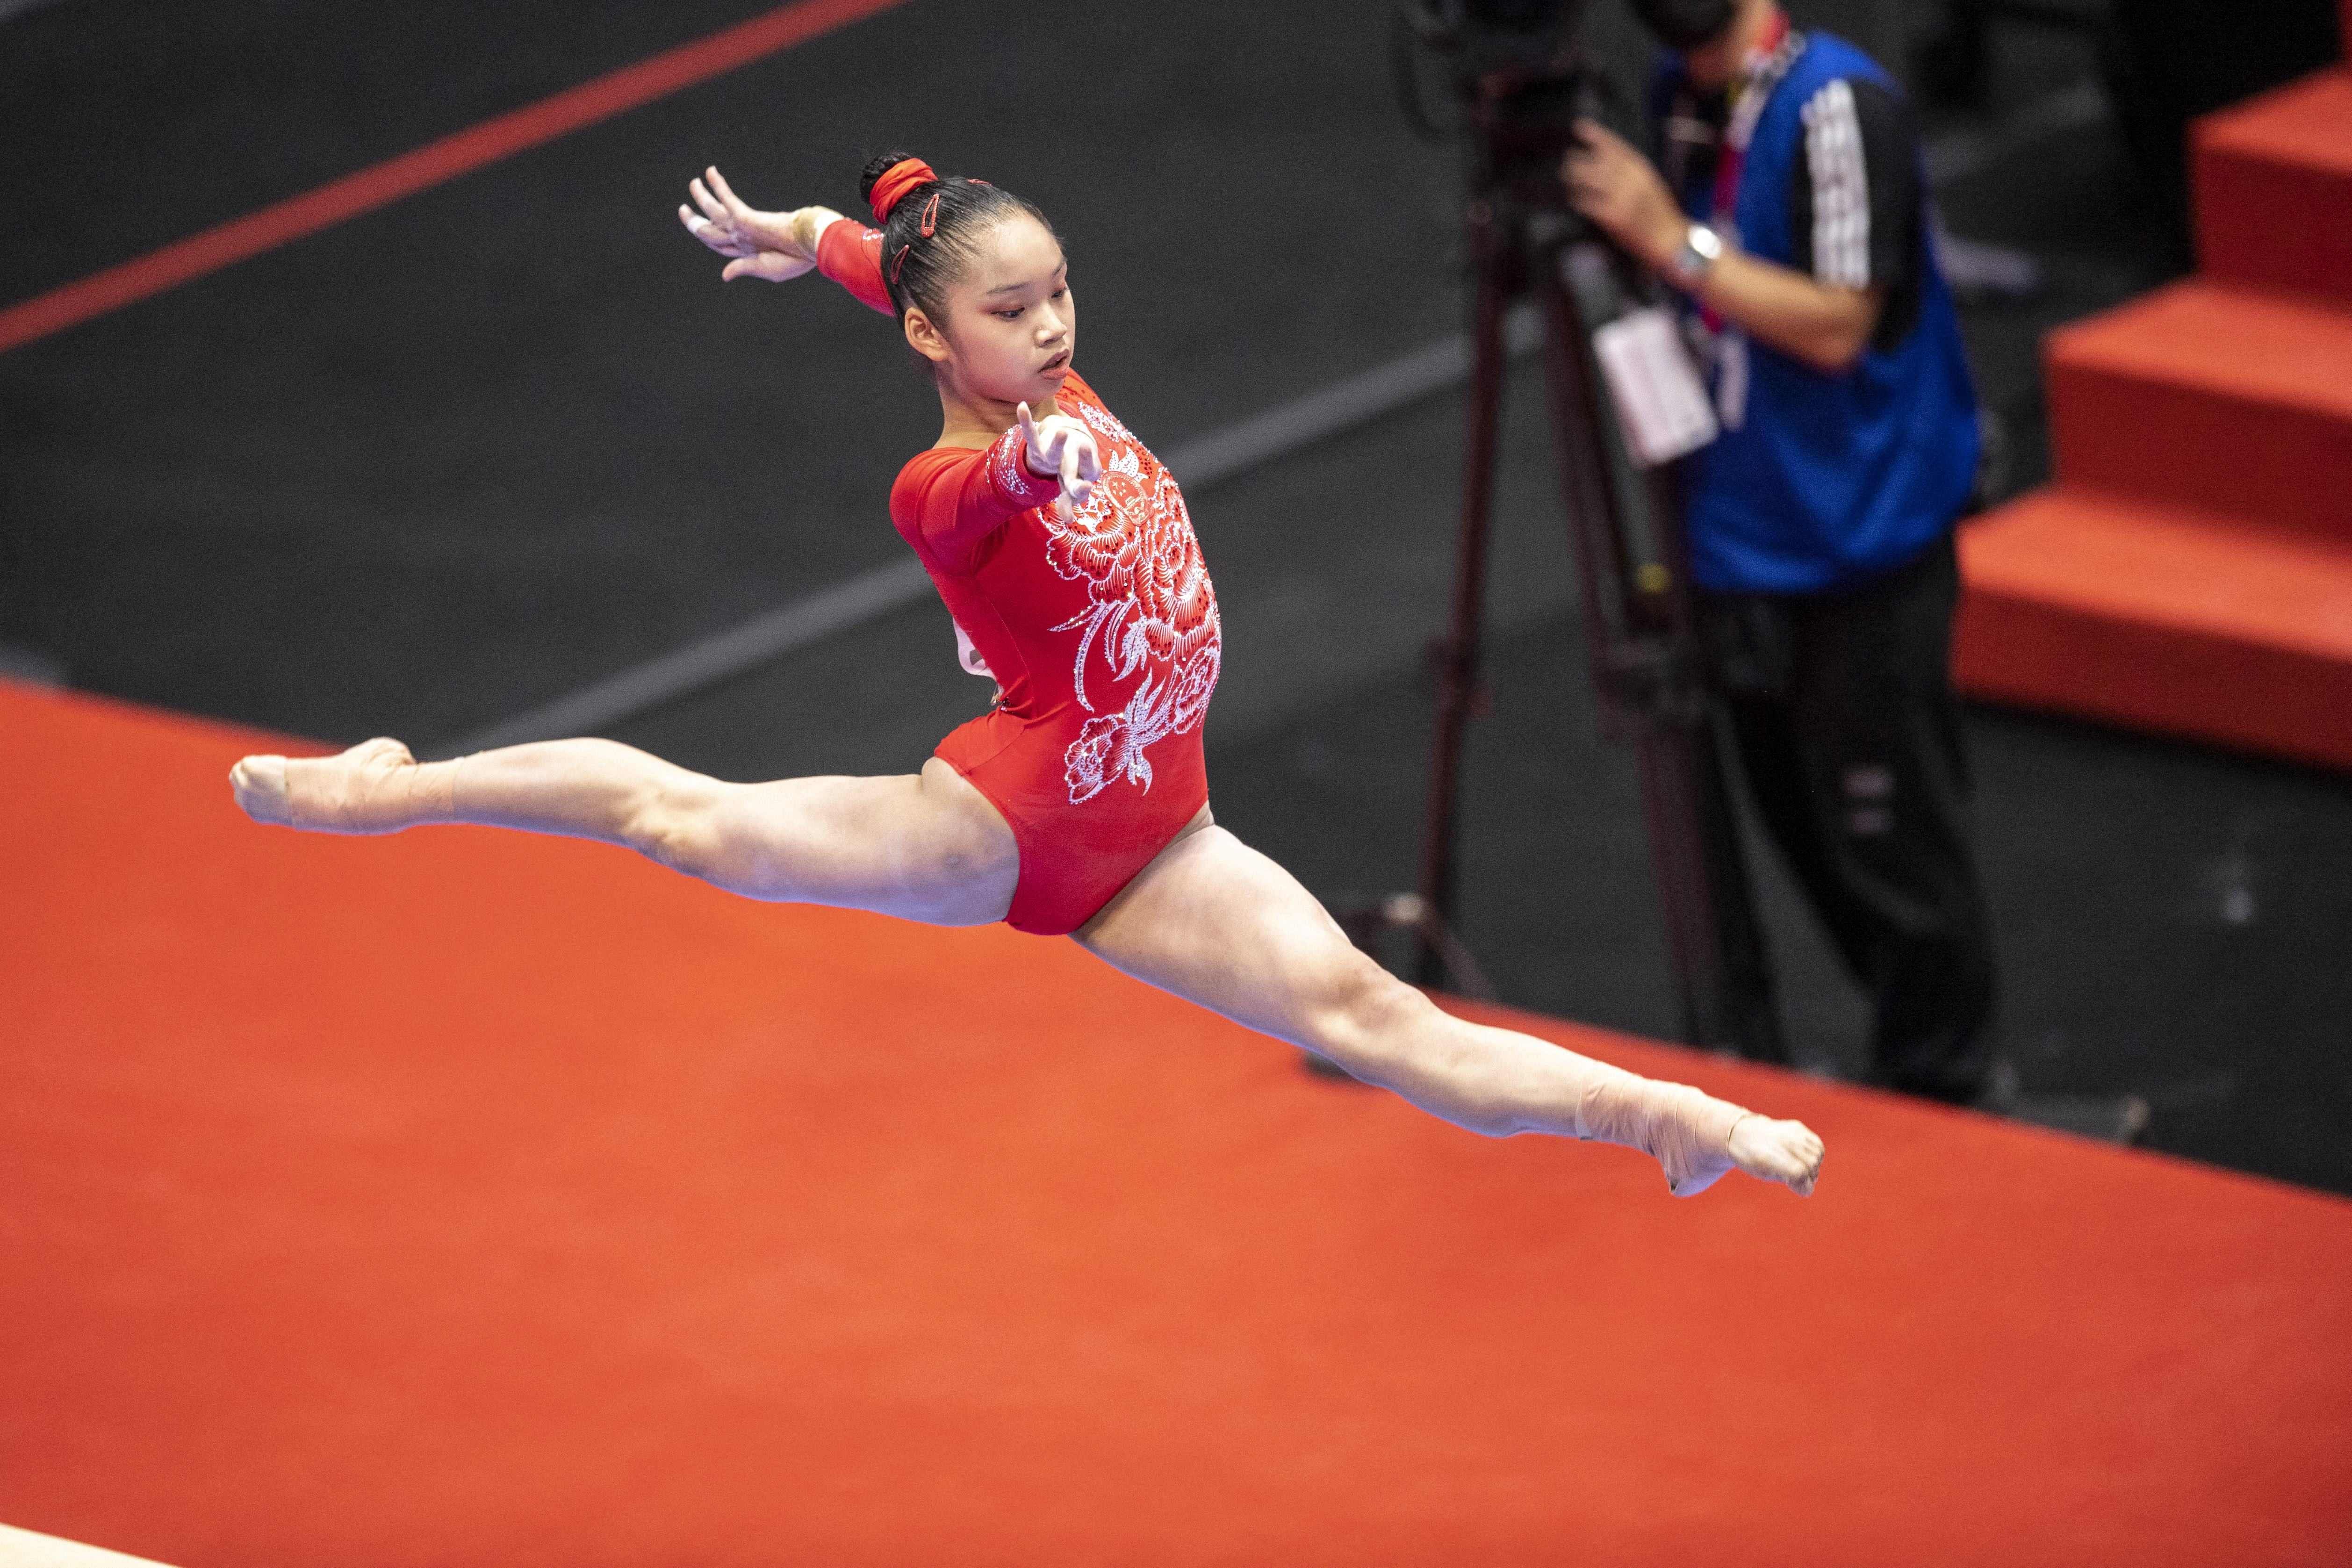 China's Luo Rui competes in the balance beam event at the women’s team qualification during the Artistic Gymnastics World Championships at the Kitakyushu City Gymnasium in Kitakyushu. Credit: AFP Photo